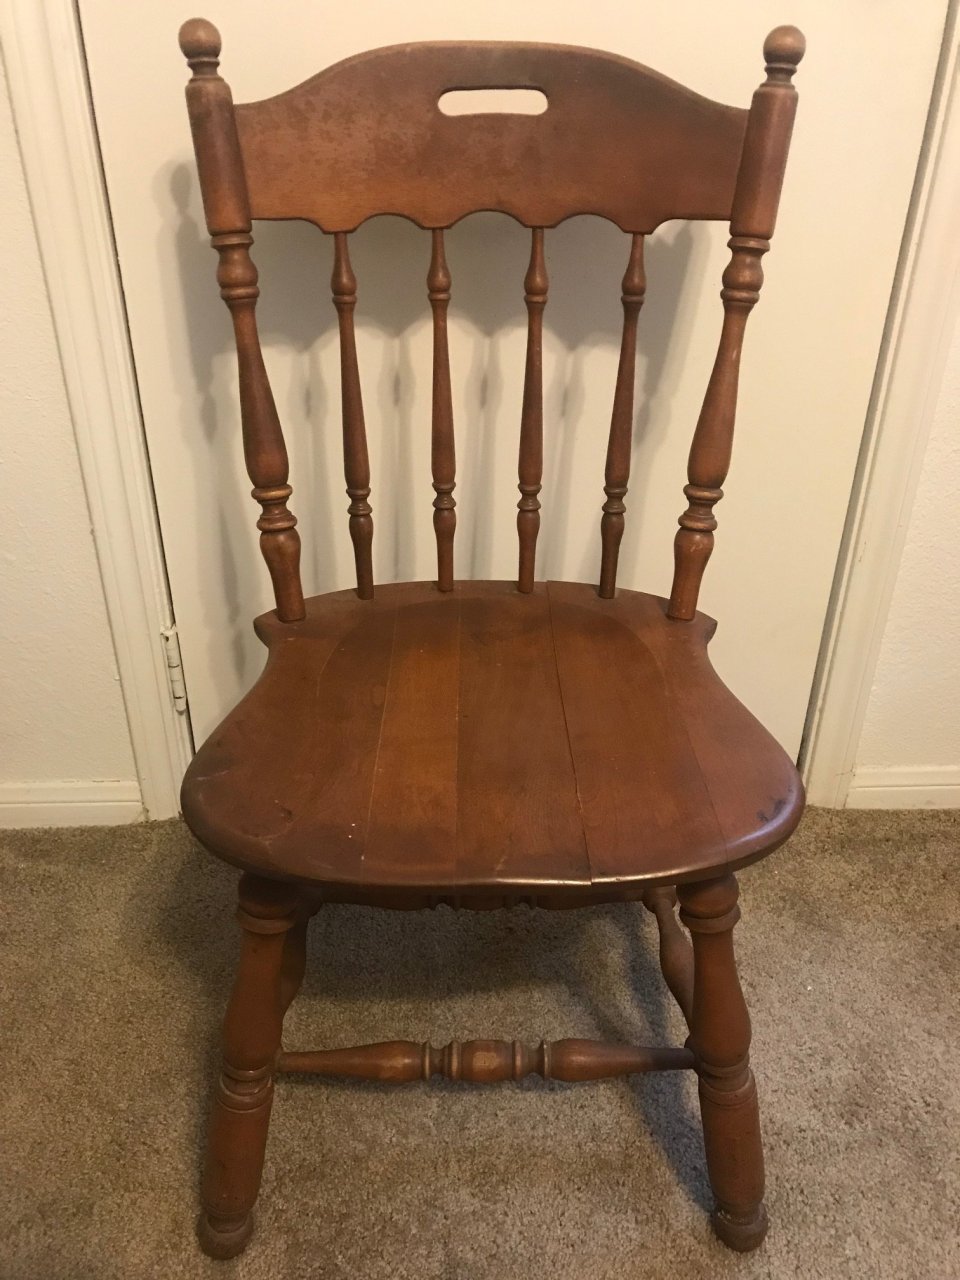 Value Would Be For Chair Ethan Allen By Baumritter Made In